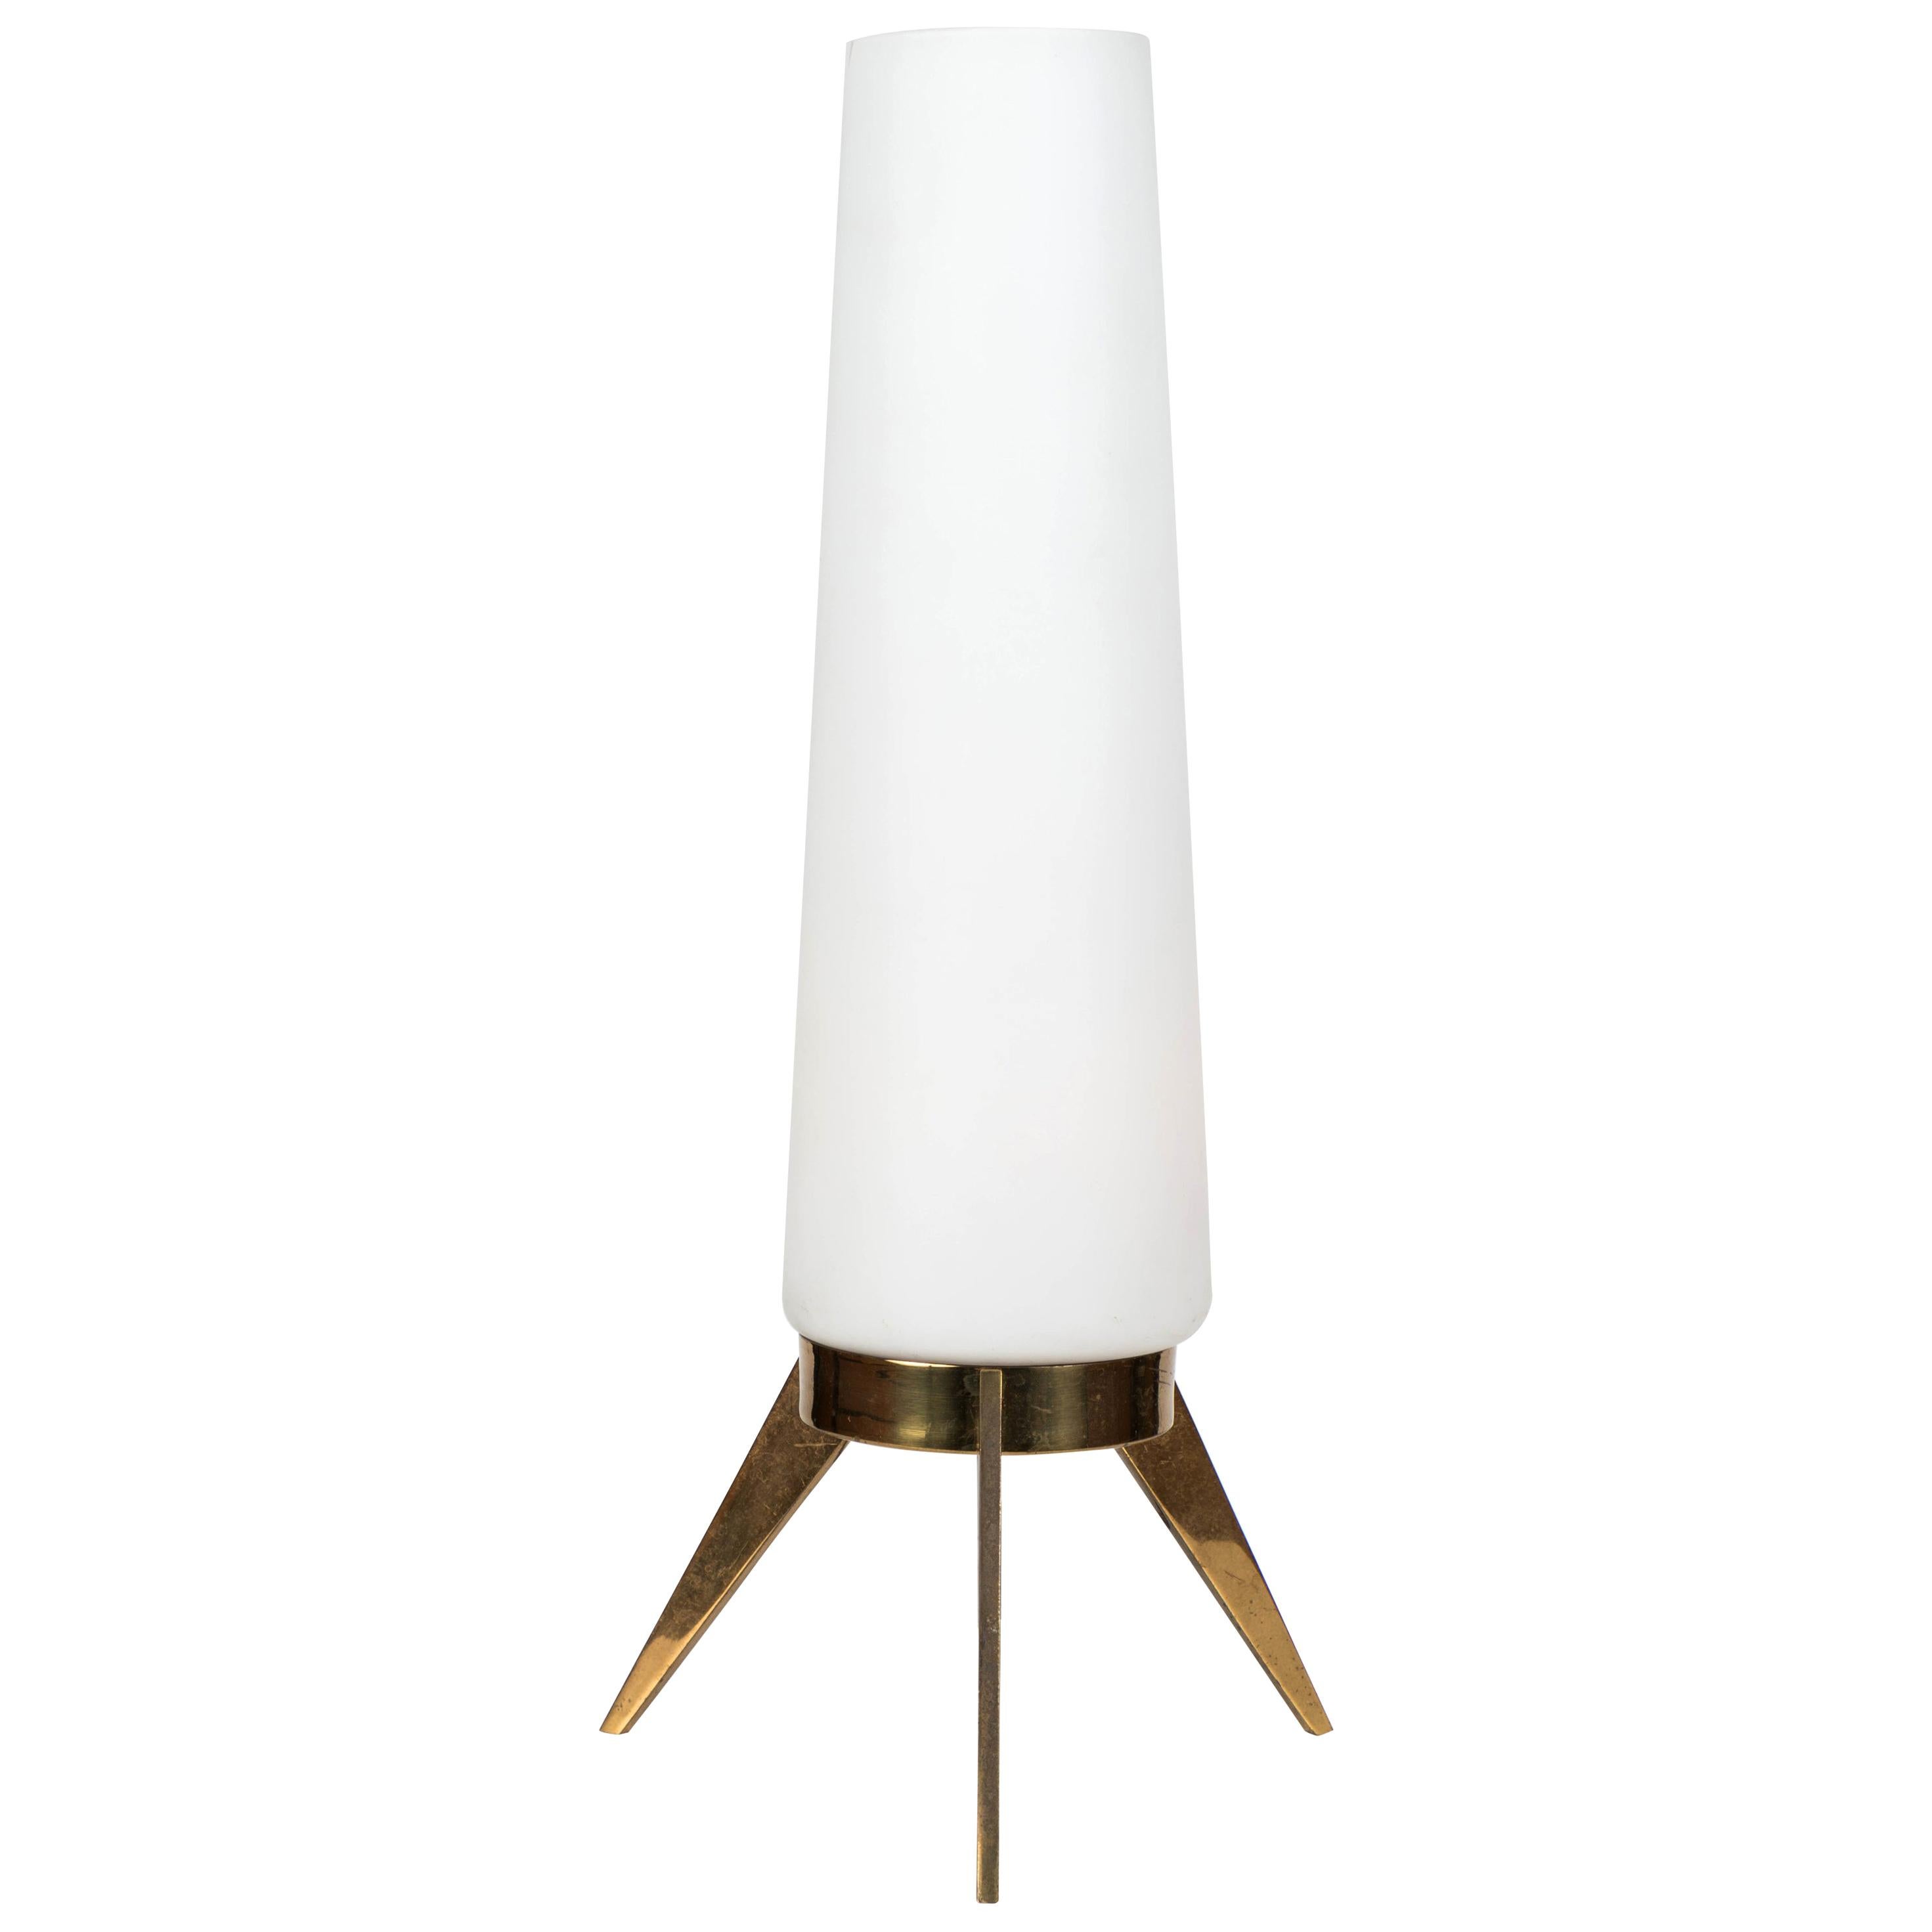 1950s Stilux Milano glass and brass tripod table lamp. This extremely unique design is highly suggestive of Angelo Lelli of Arredoluce, but attributed to Stilux Milano. 

Executed in sculpturally blown opaline glass and lightly patinated